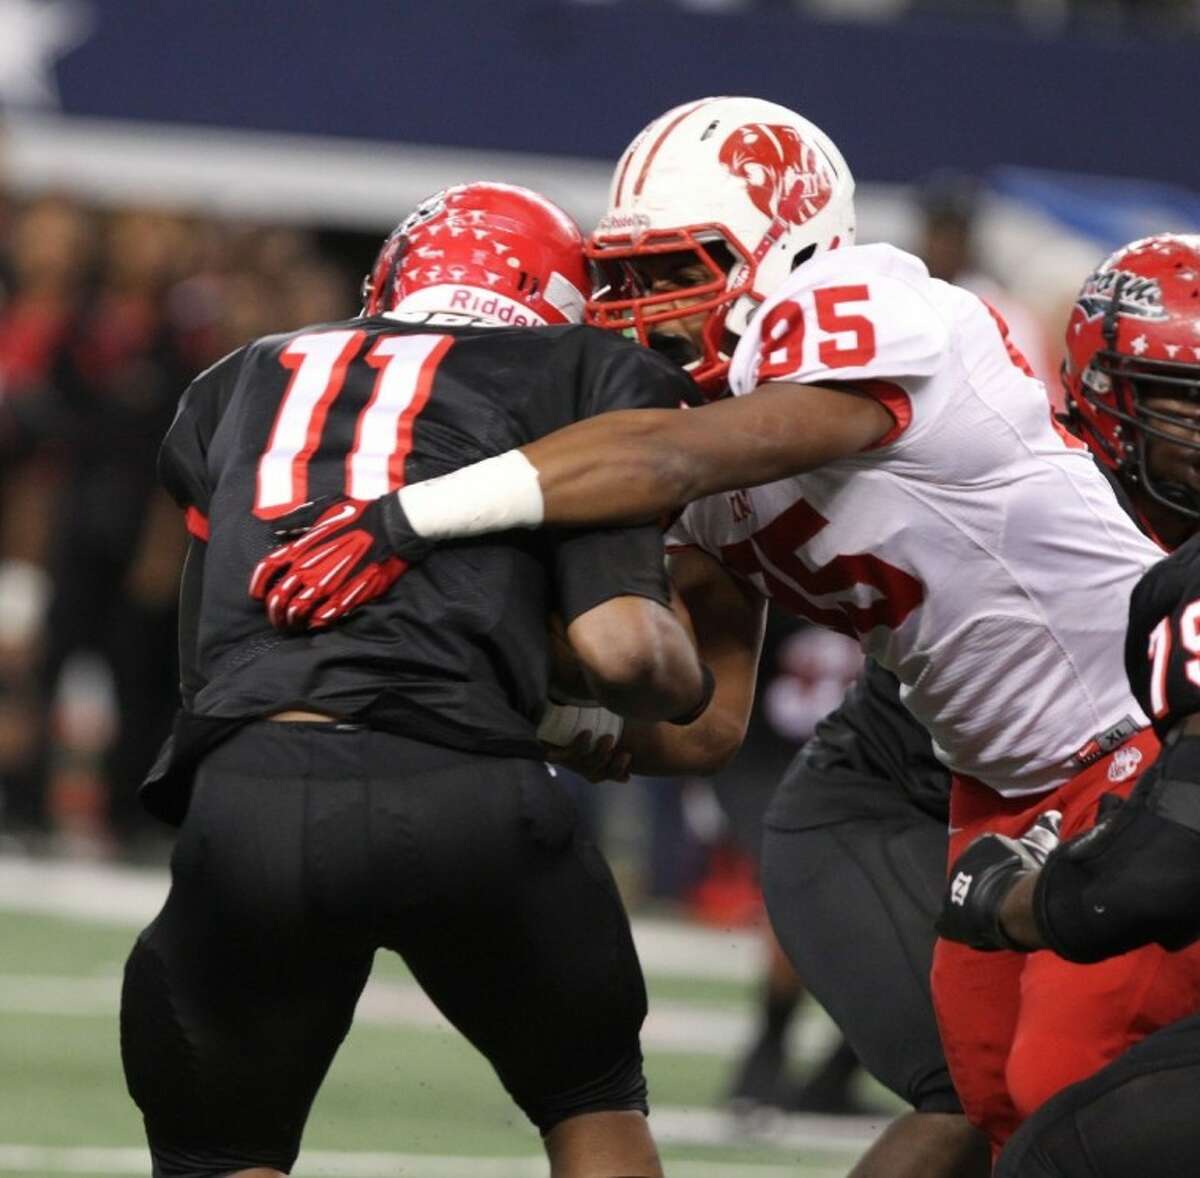 Katy defensive lineman Tim Wilkerson sacks Cedar Hill quarterback Damion Hobbs during the Tigers' 35-24 victory in the state final Dec. 22 at Cowboys Stadium in Arlington.